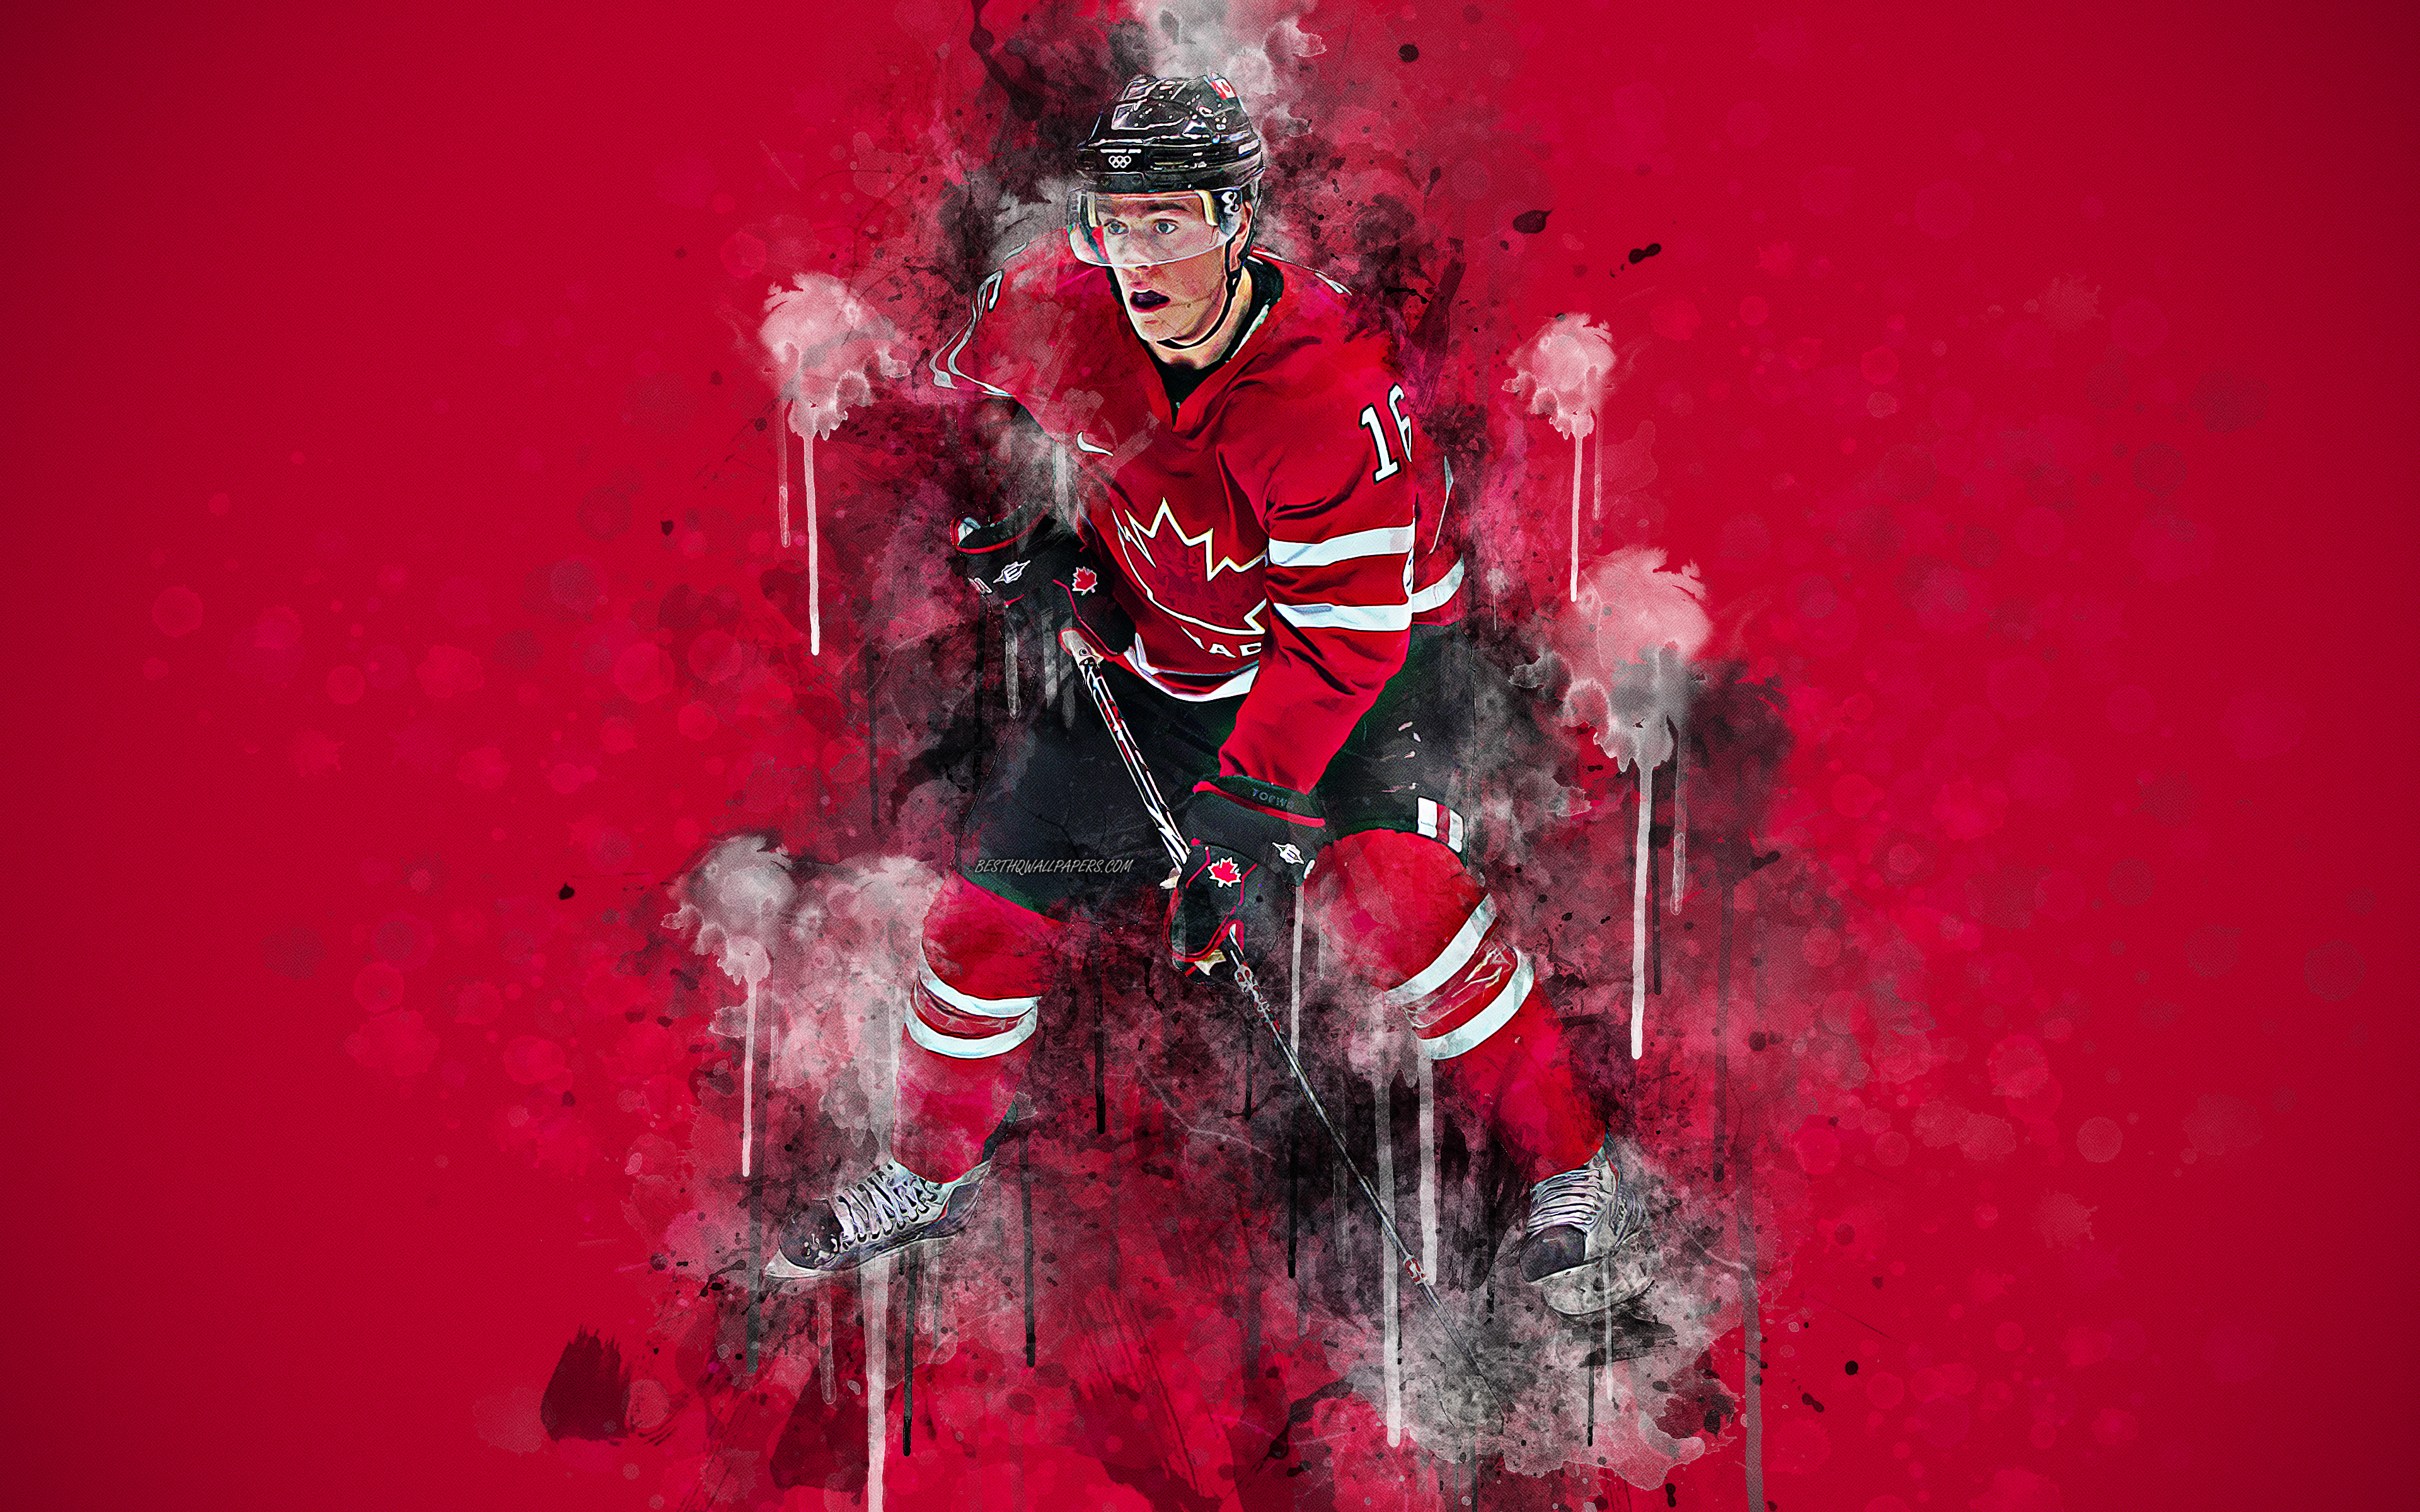 Download wallpaper Jonathan Toews, 4k, Canadian hockey player, red art, grunge style, Canadian hockey team, creative art, splashes, hockey, Canada, red grunge background for desktop with resolution 3840x2400. High Quality HD picture